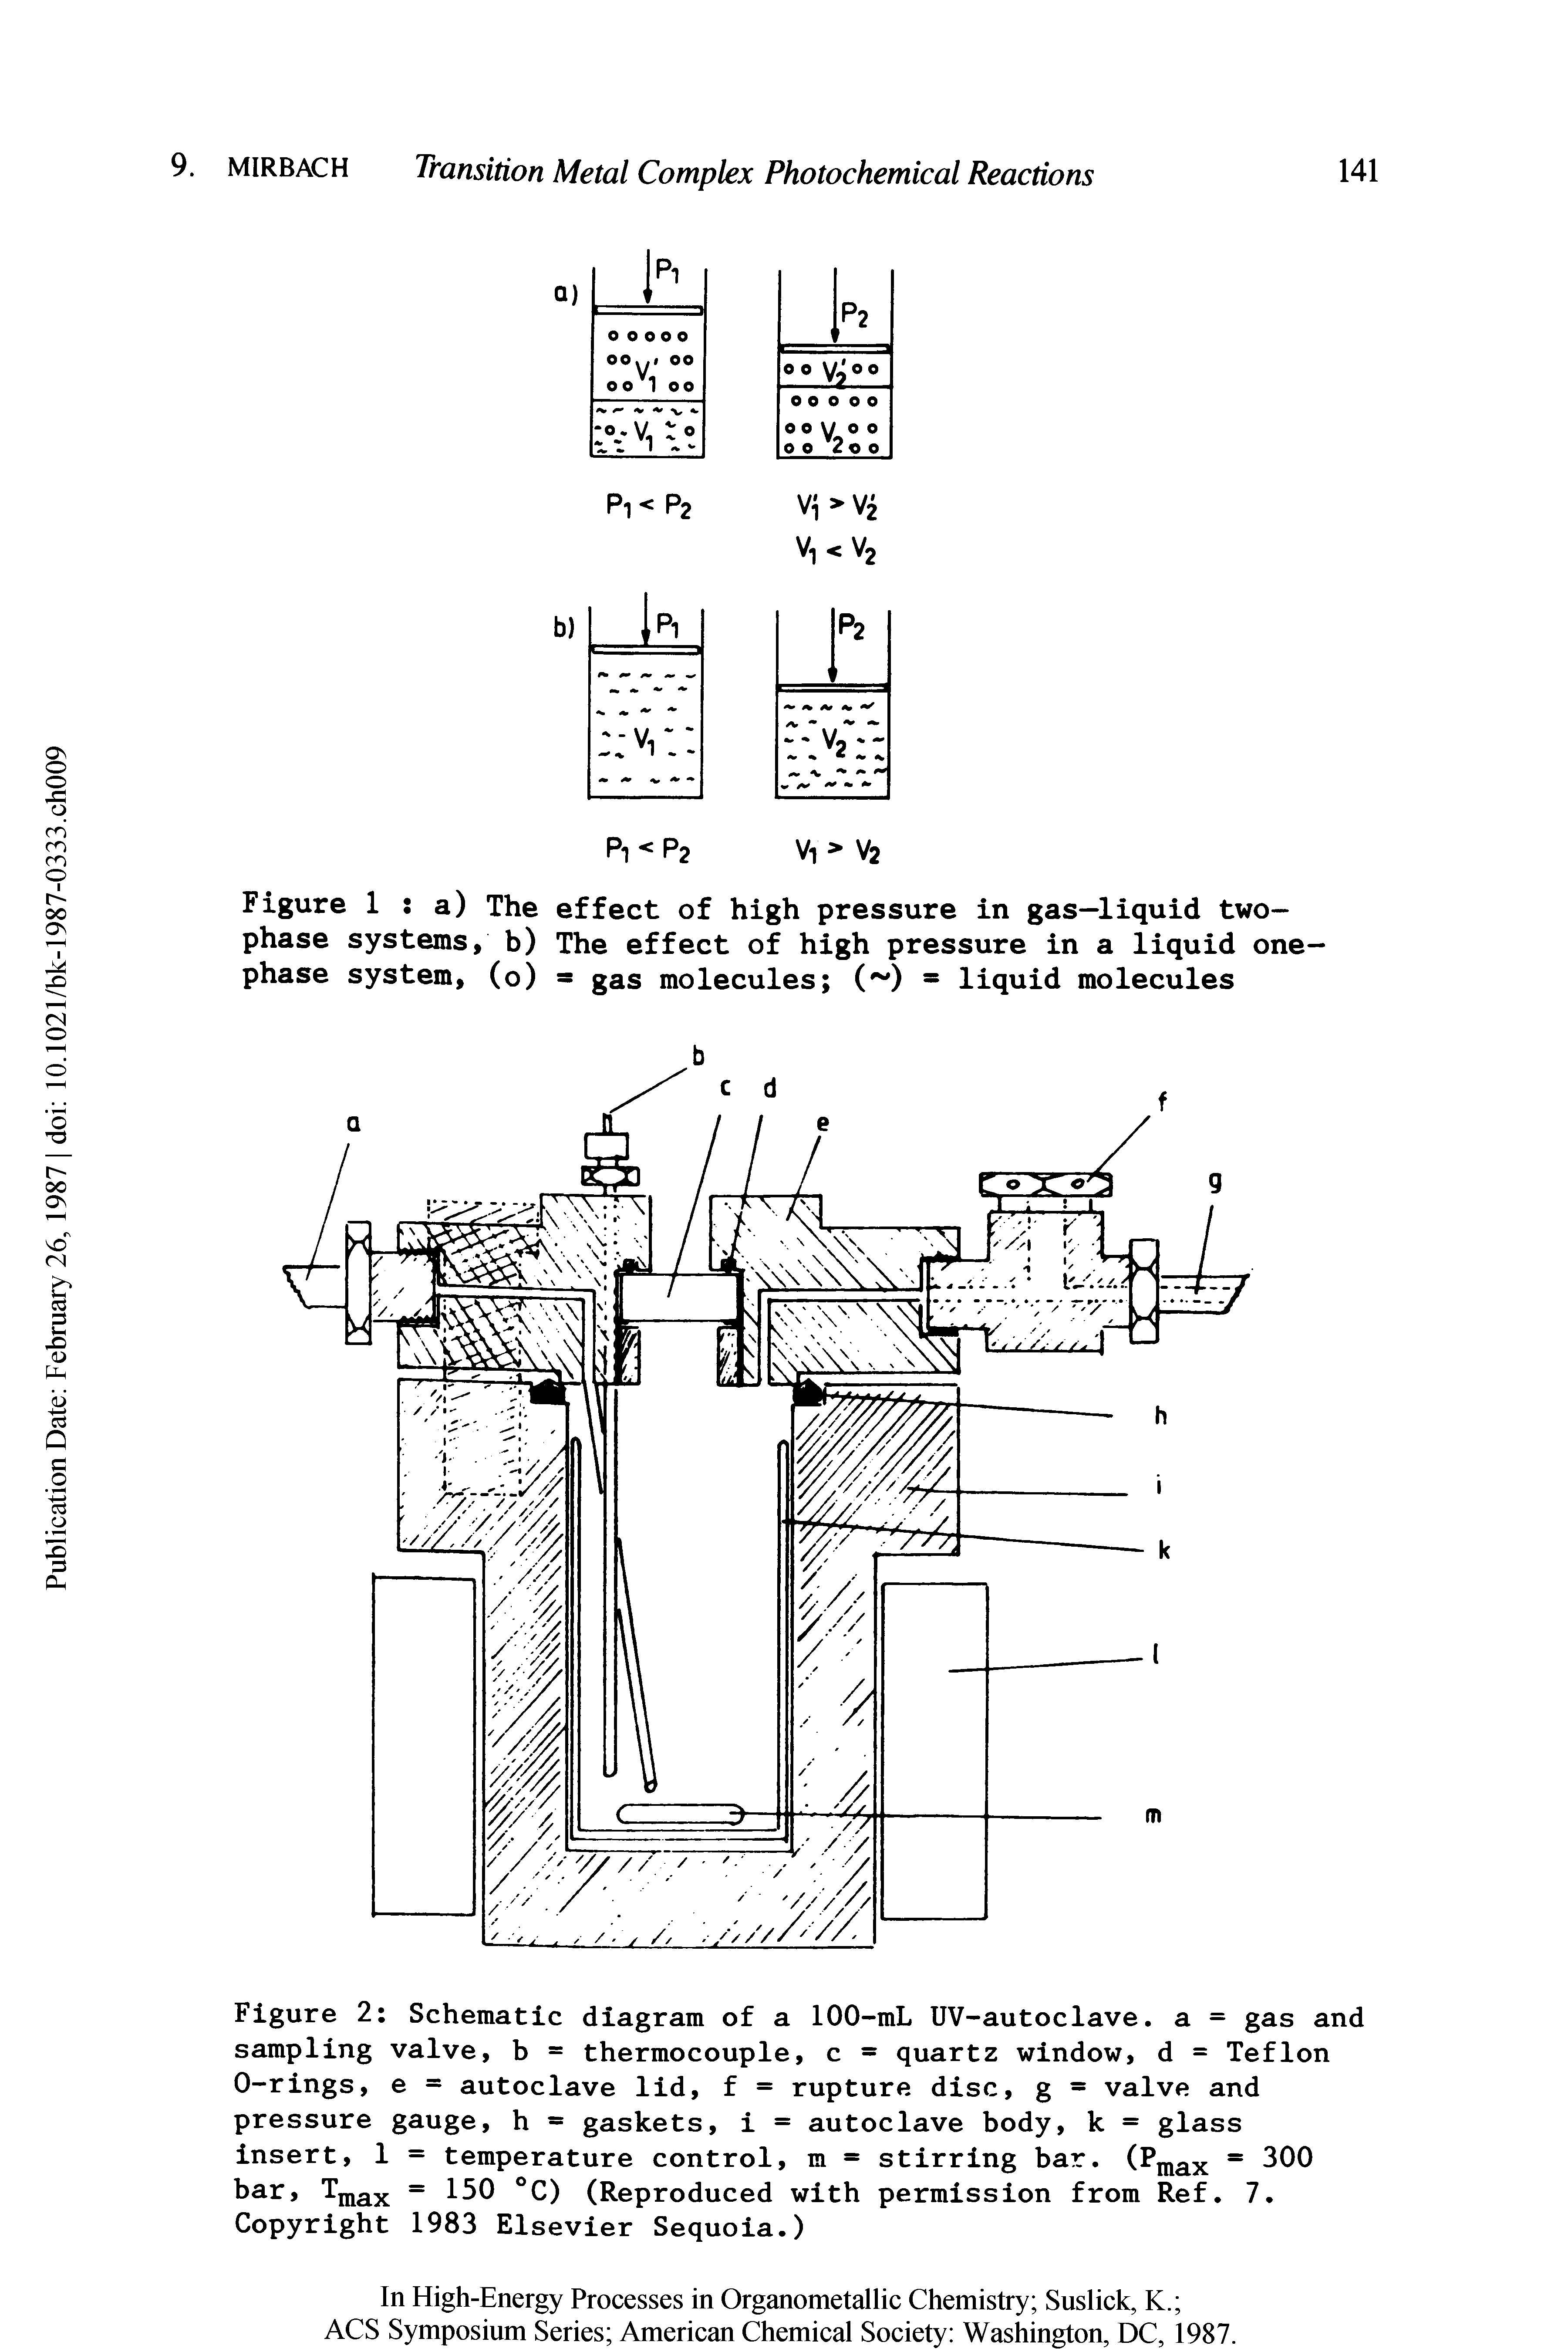 Figure 2 Schematic diagram of a 100-mL UV-autoclave. a = gas and sampling valve, b = thermocouple, c = quartz window, d = Teflon O-rings, e = autoclave lid, f = rupture disc, g = valve and pressure gauge, h gaskets, i = autoclave body, k = glass insert, 1 = temperature control, m stirring bar. (Pmax 300 bar, Tmax = 150 °C) (Reproduced with permission from Ref. 7. Copyright 1983 Elsevier Sequoia.)...